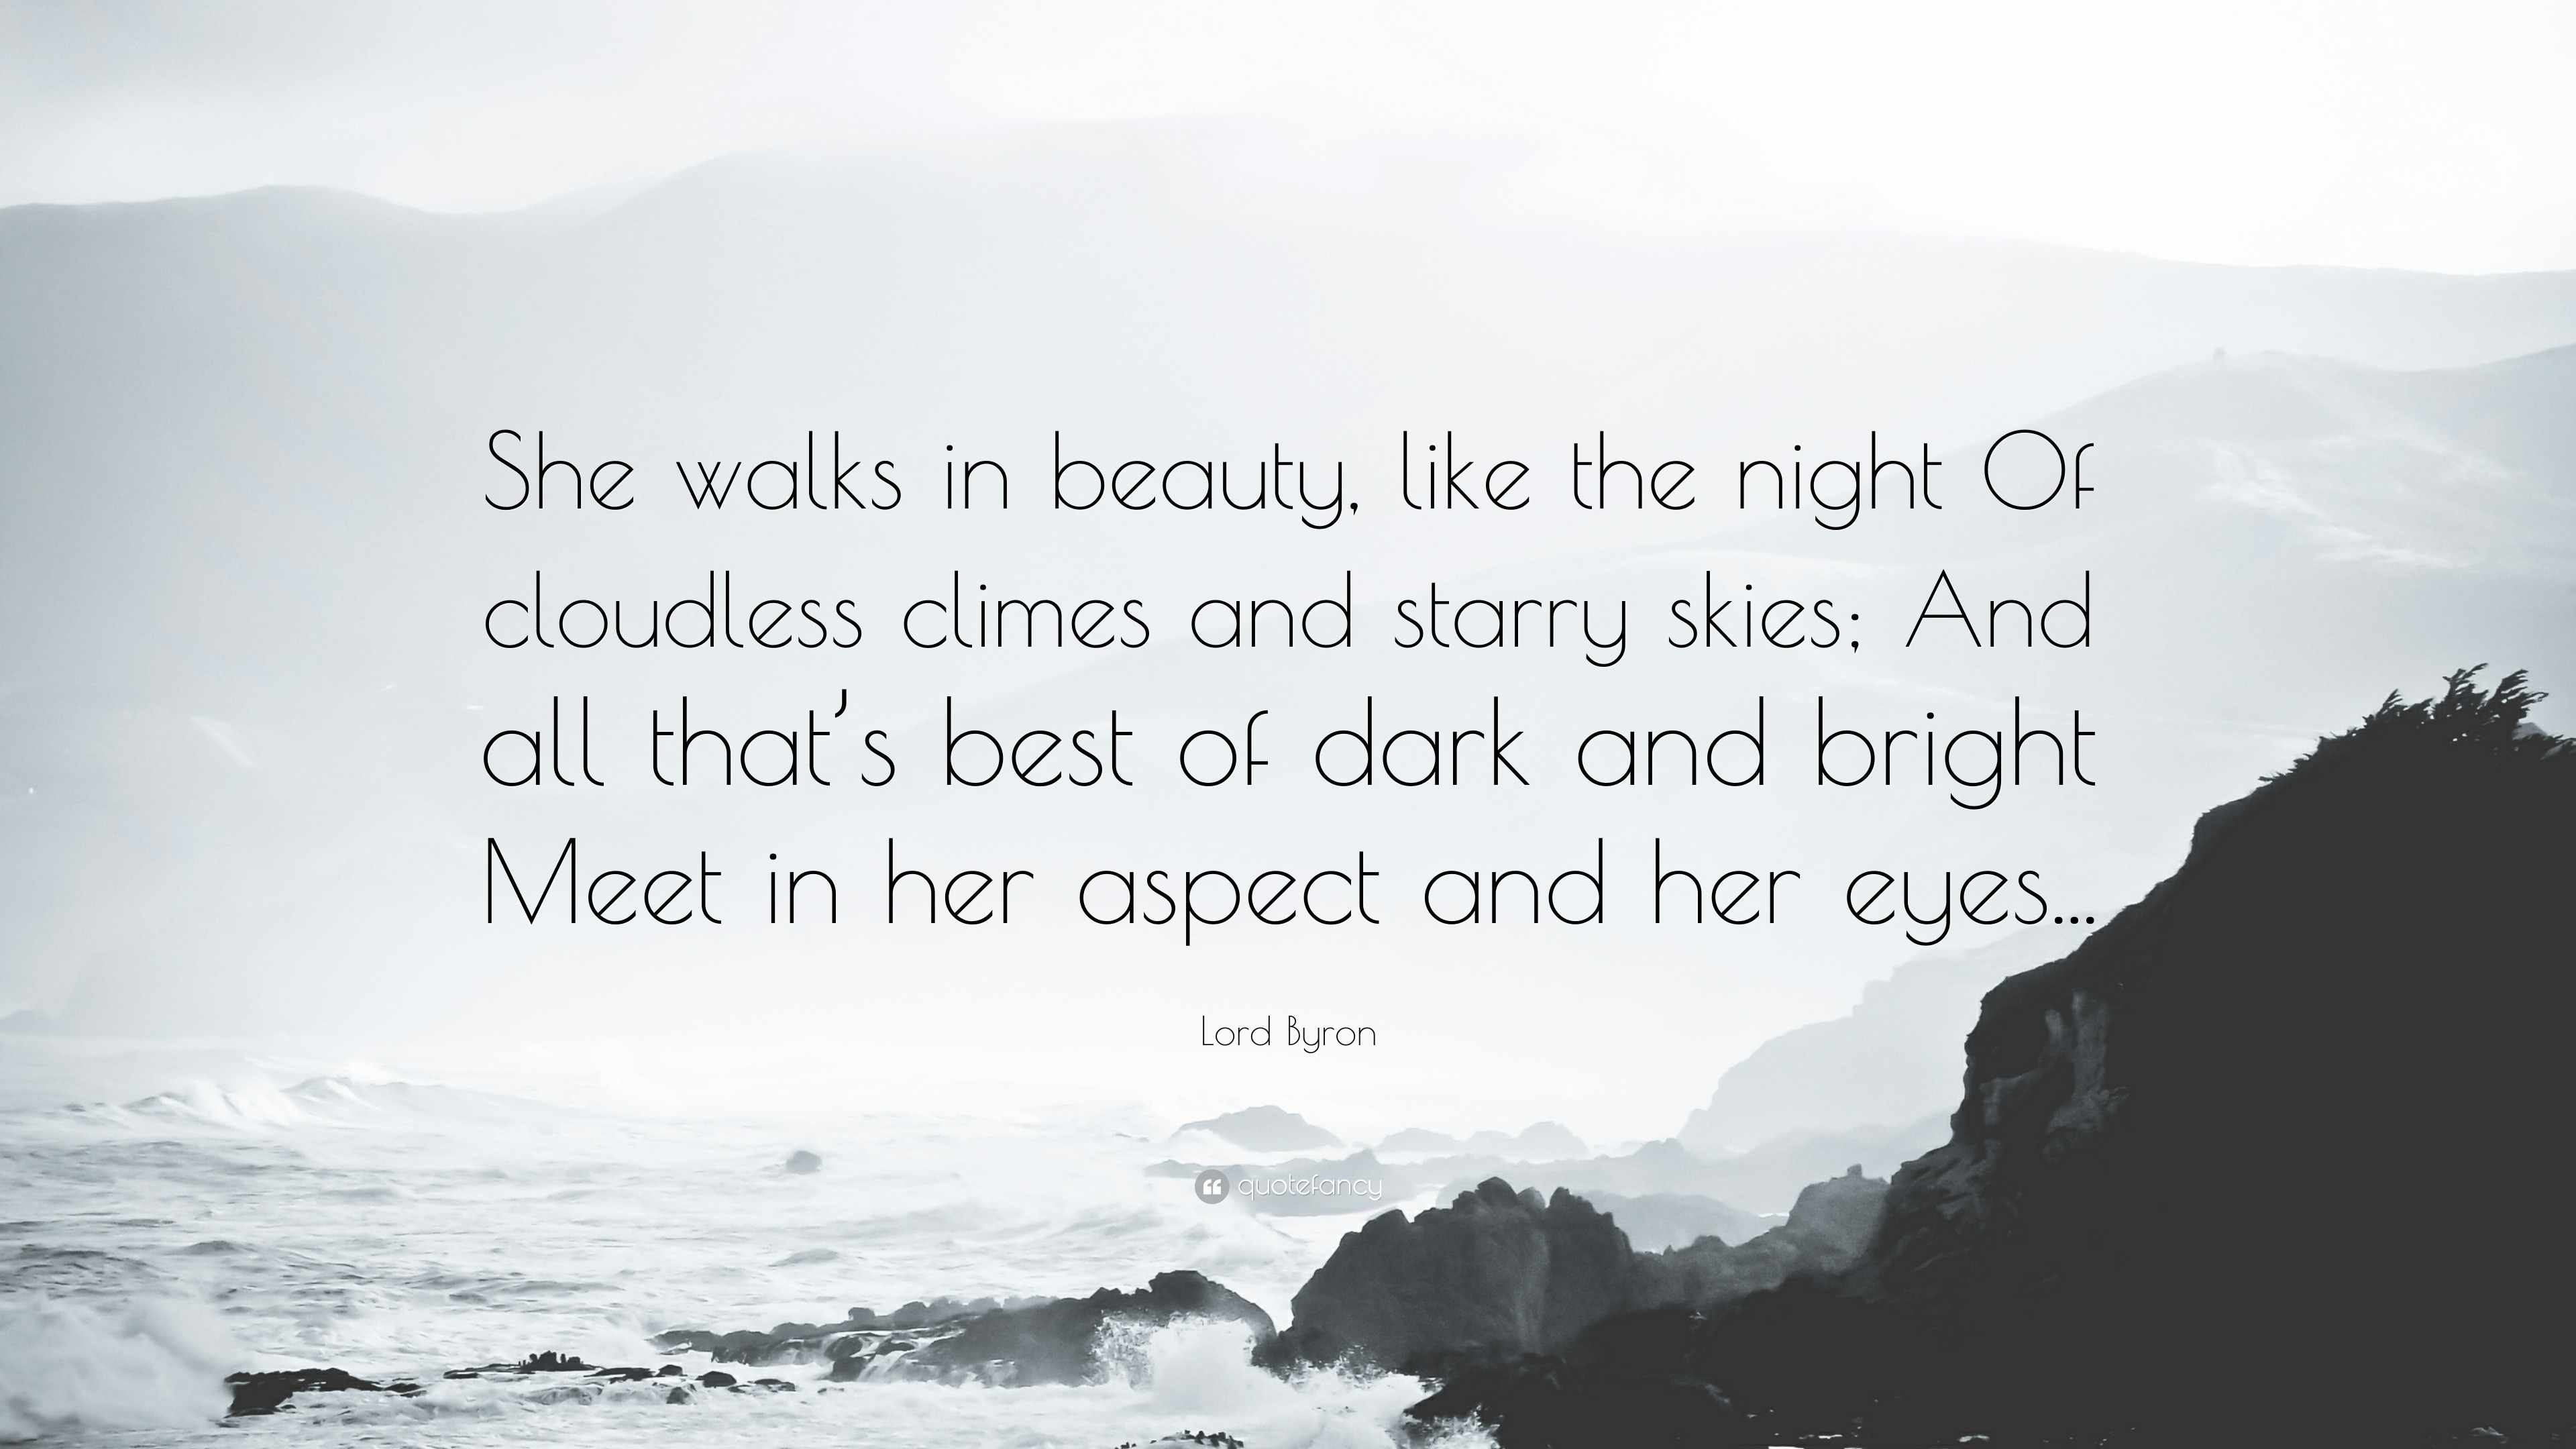 Lord Byron quote: She walks in beauty, like the night Of cloudless